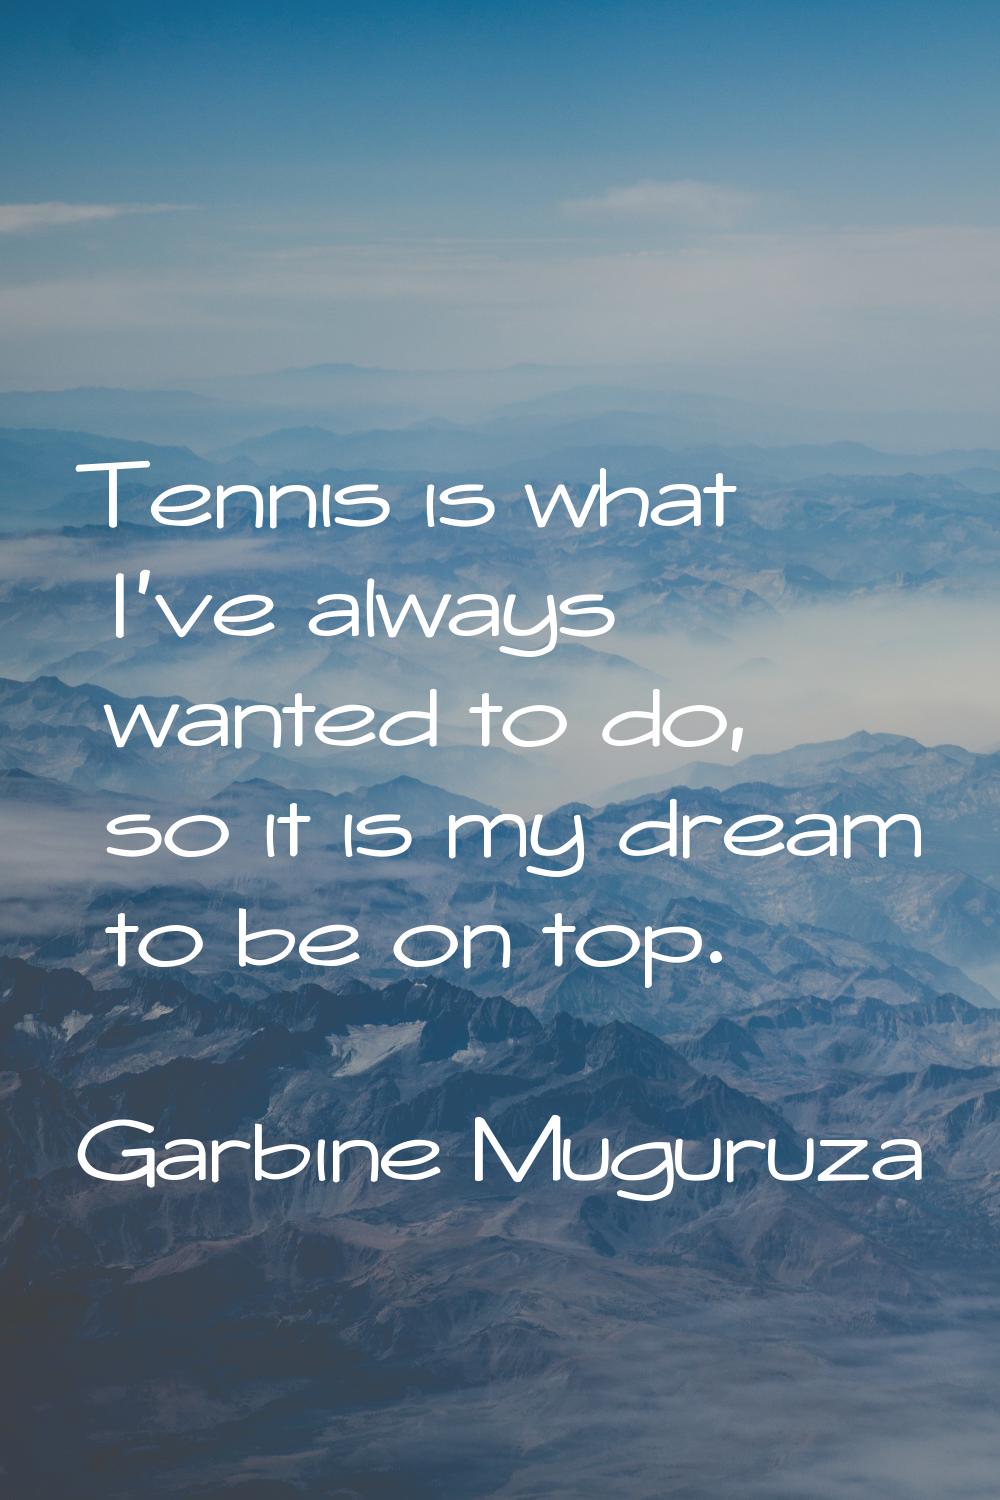 Tennis is what I've always wanted to do, so it is my dream to be on top.